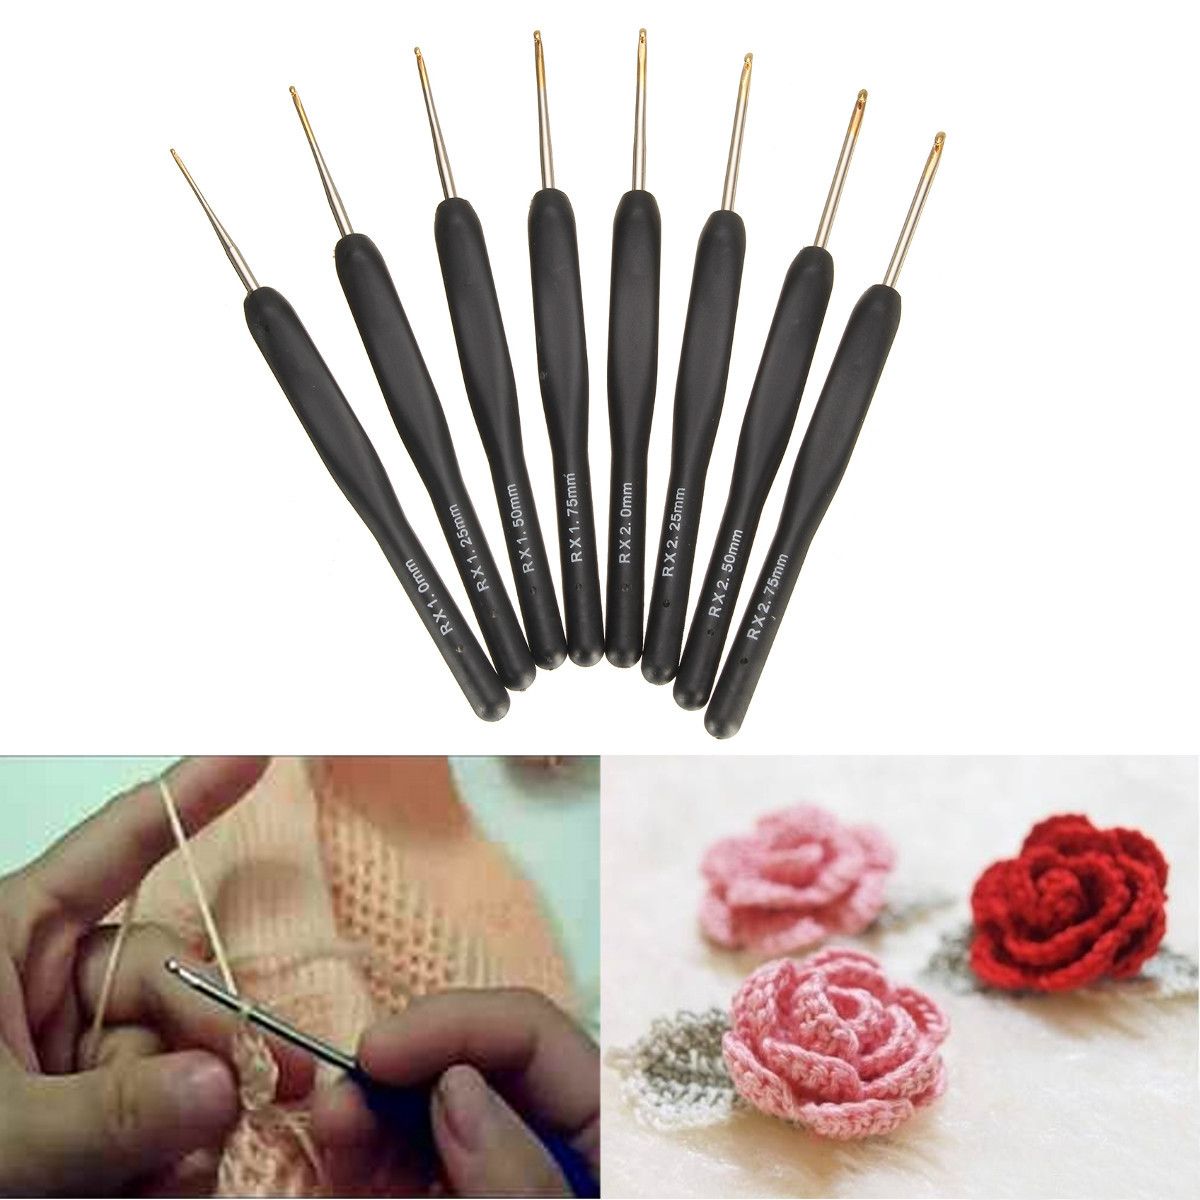 8-Bagging-Sweater-Needle-Knitting-Tools-10--125--15--175--20--225--25--275mm-Fine-Soft-Handle-Croche-1156194